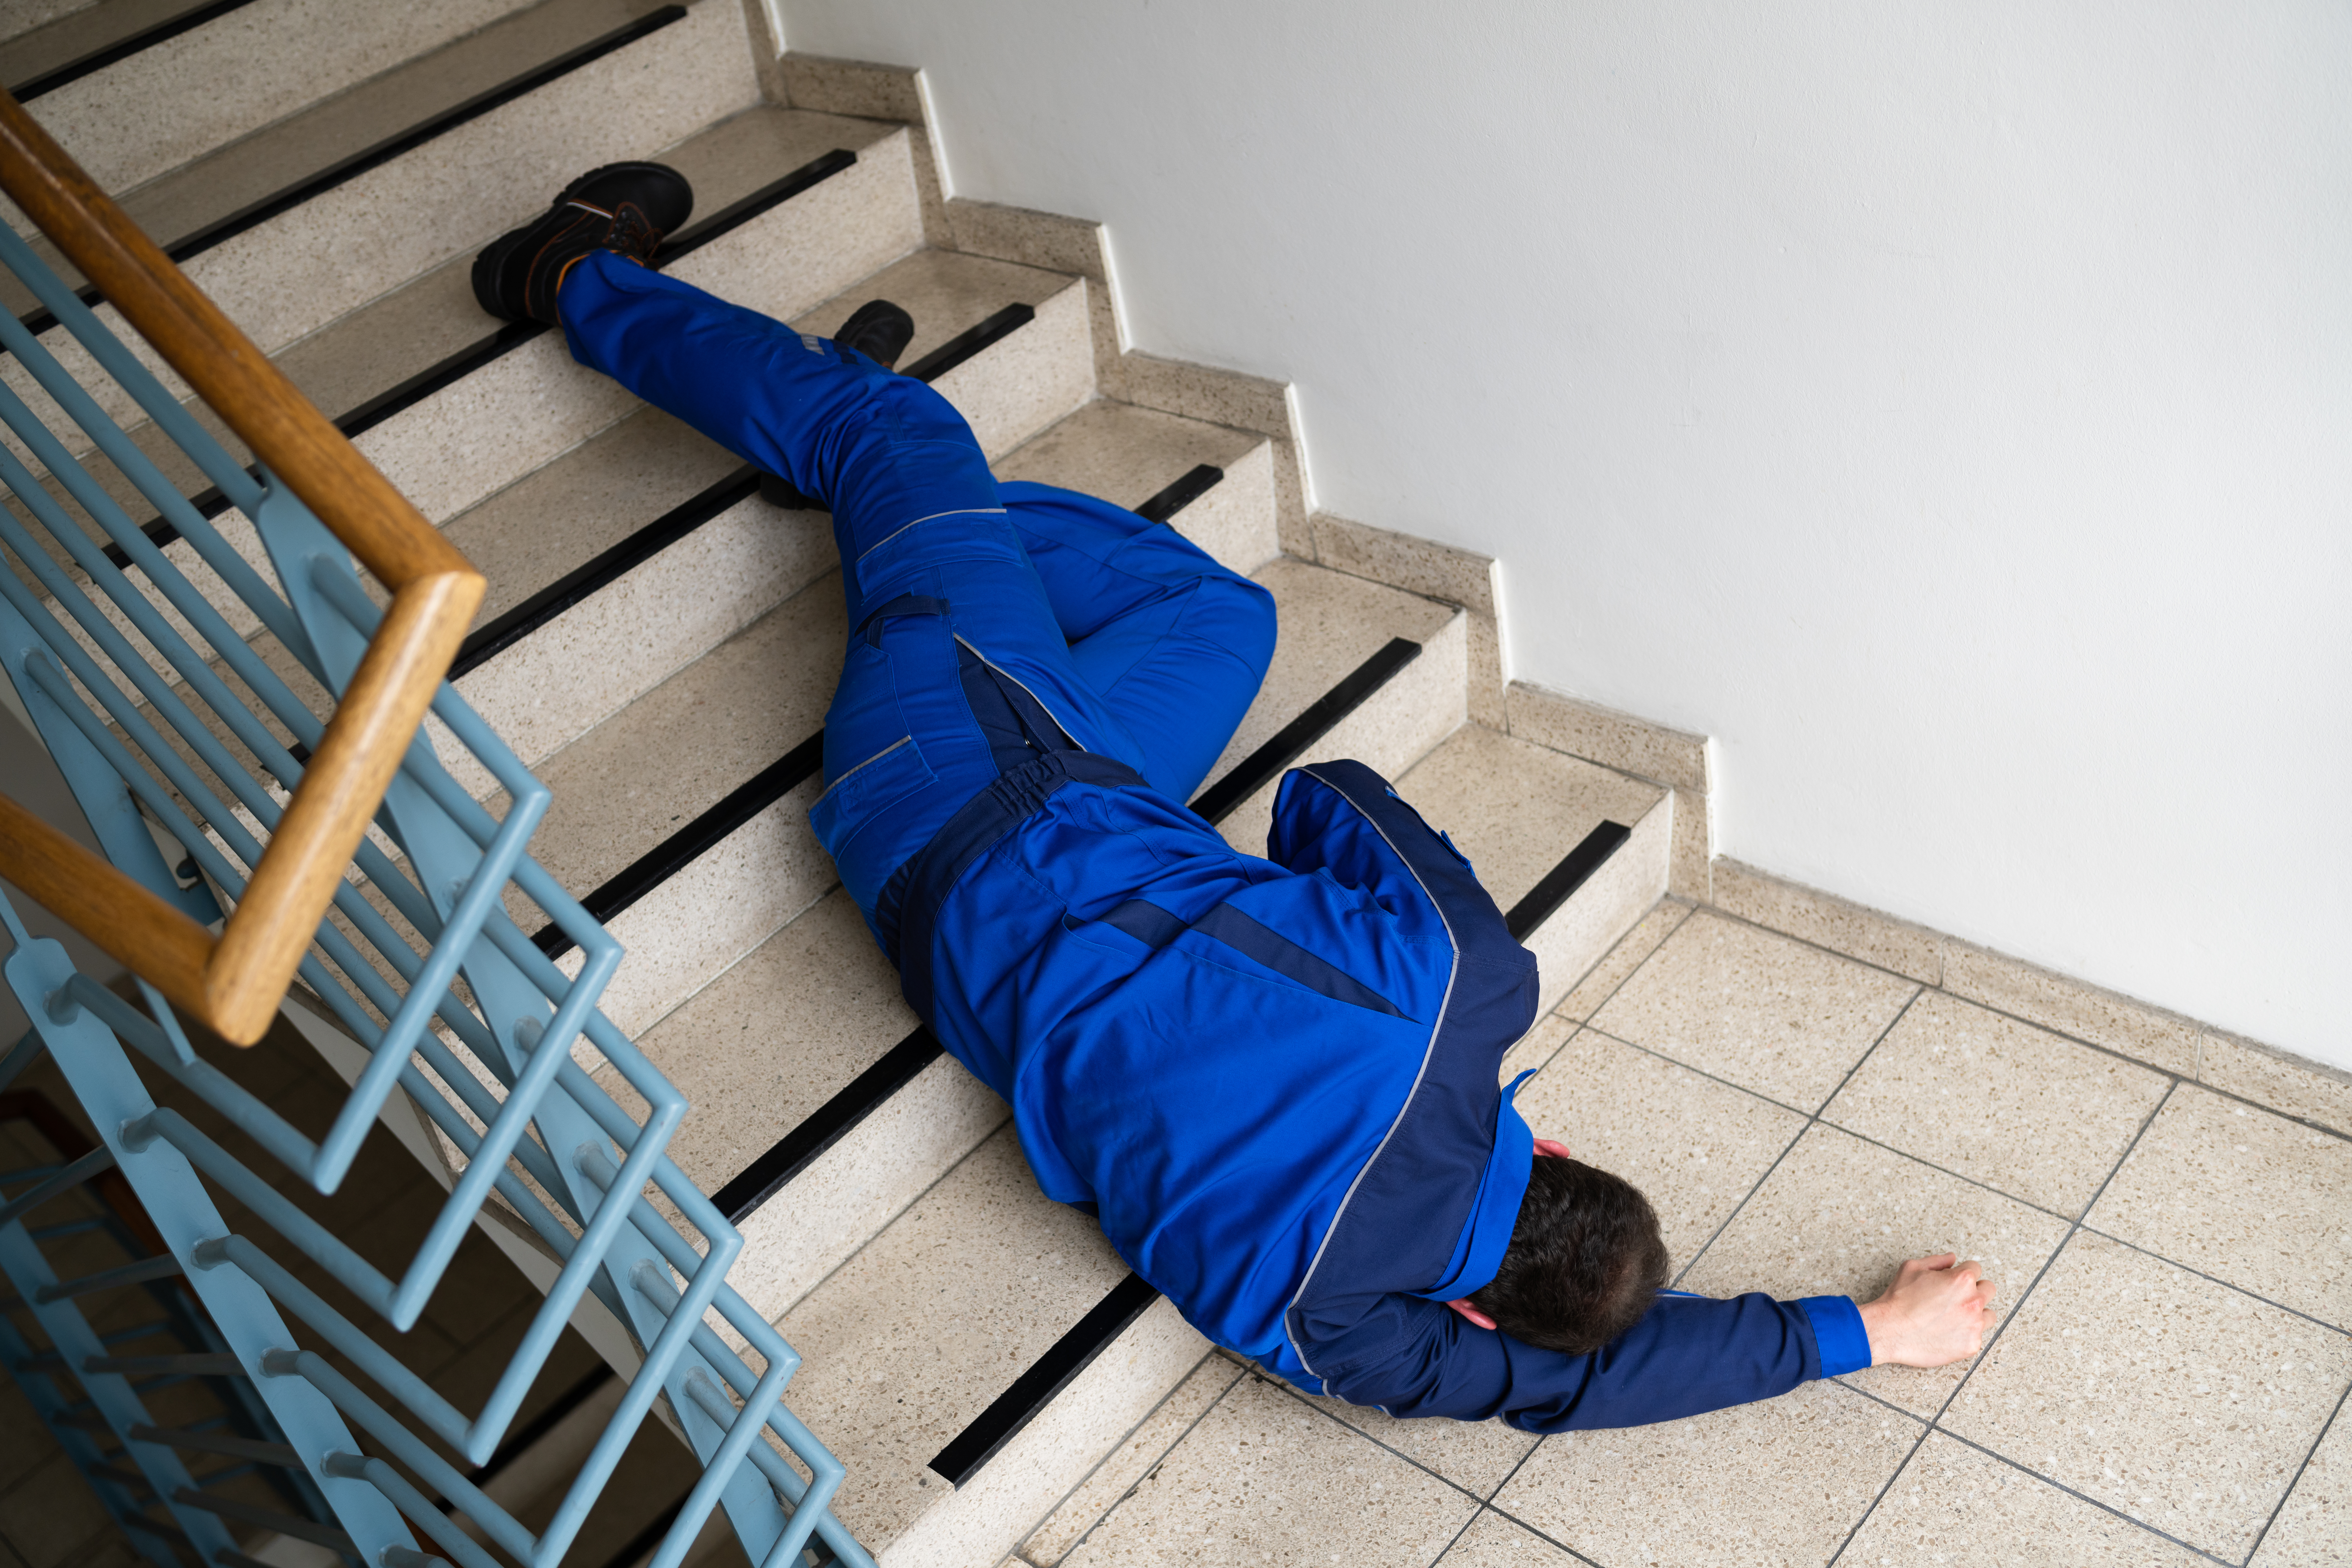 Can I Sue My Landlord For a Slip-and-Fall?